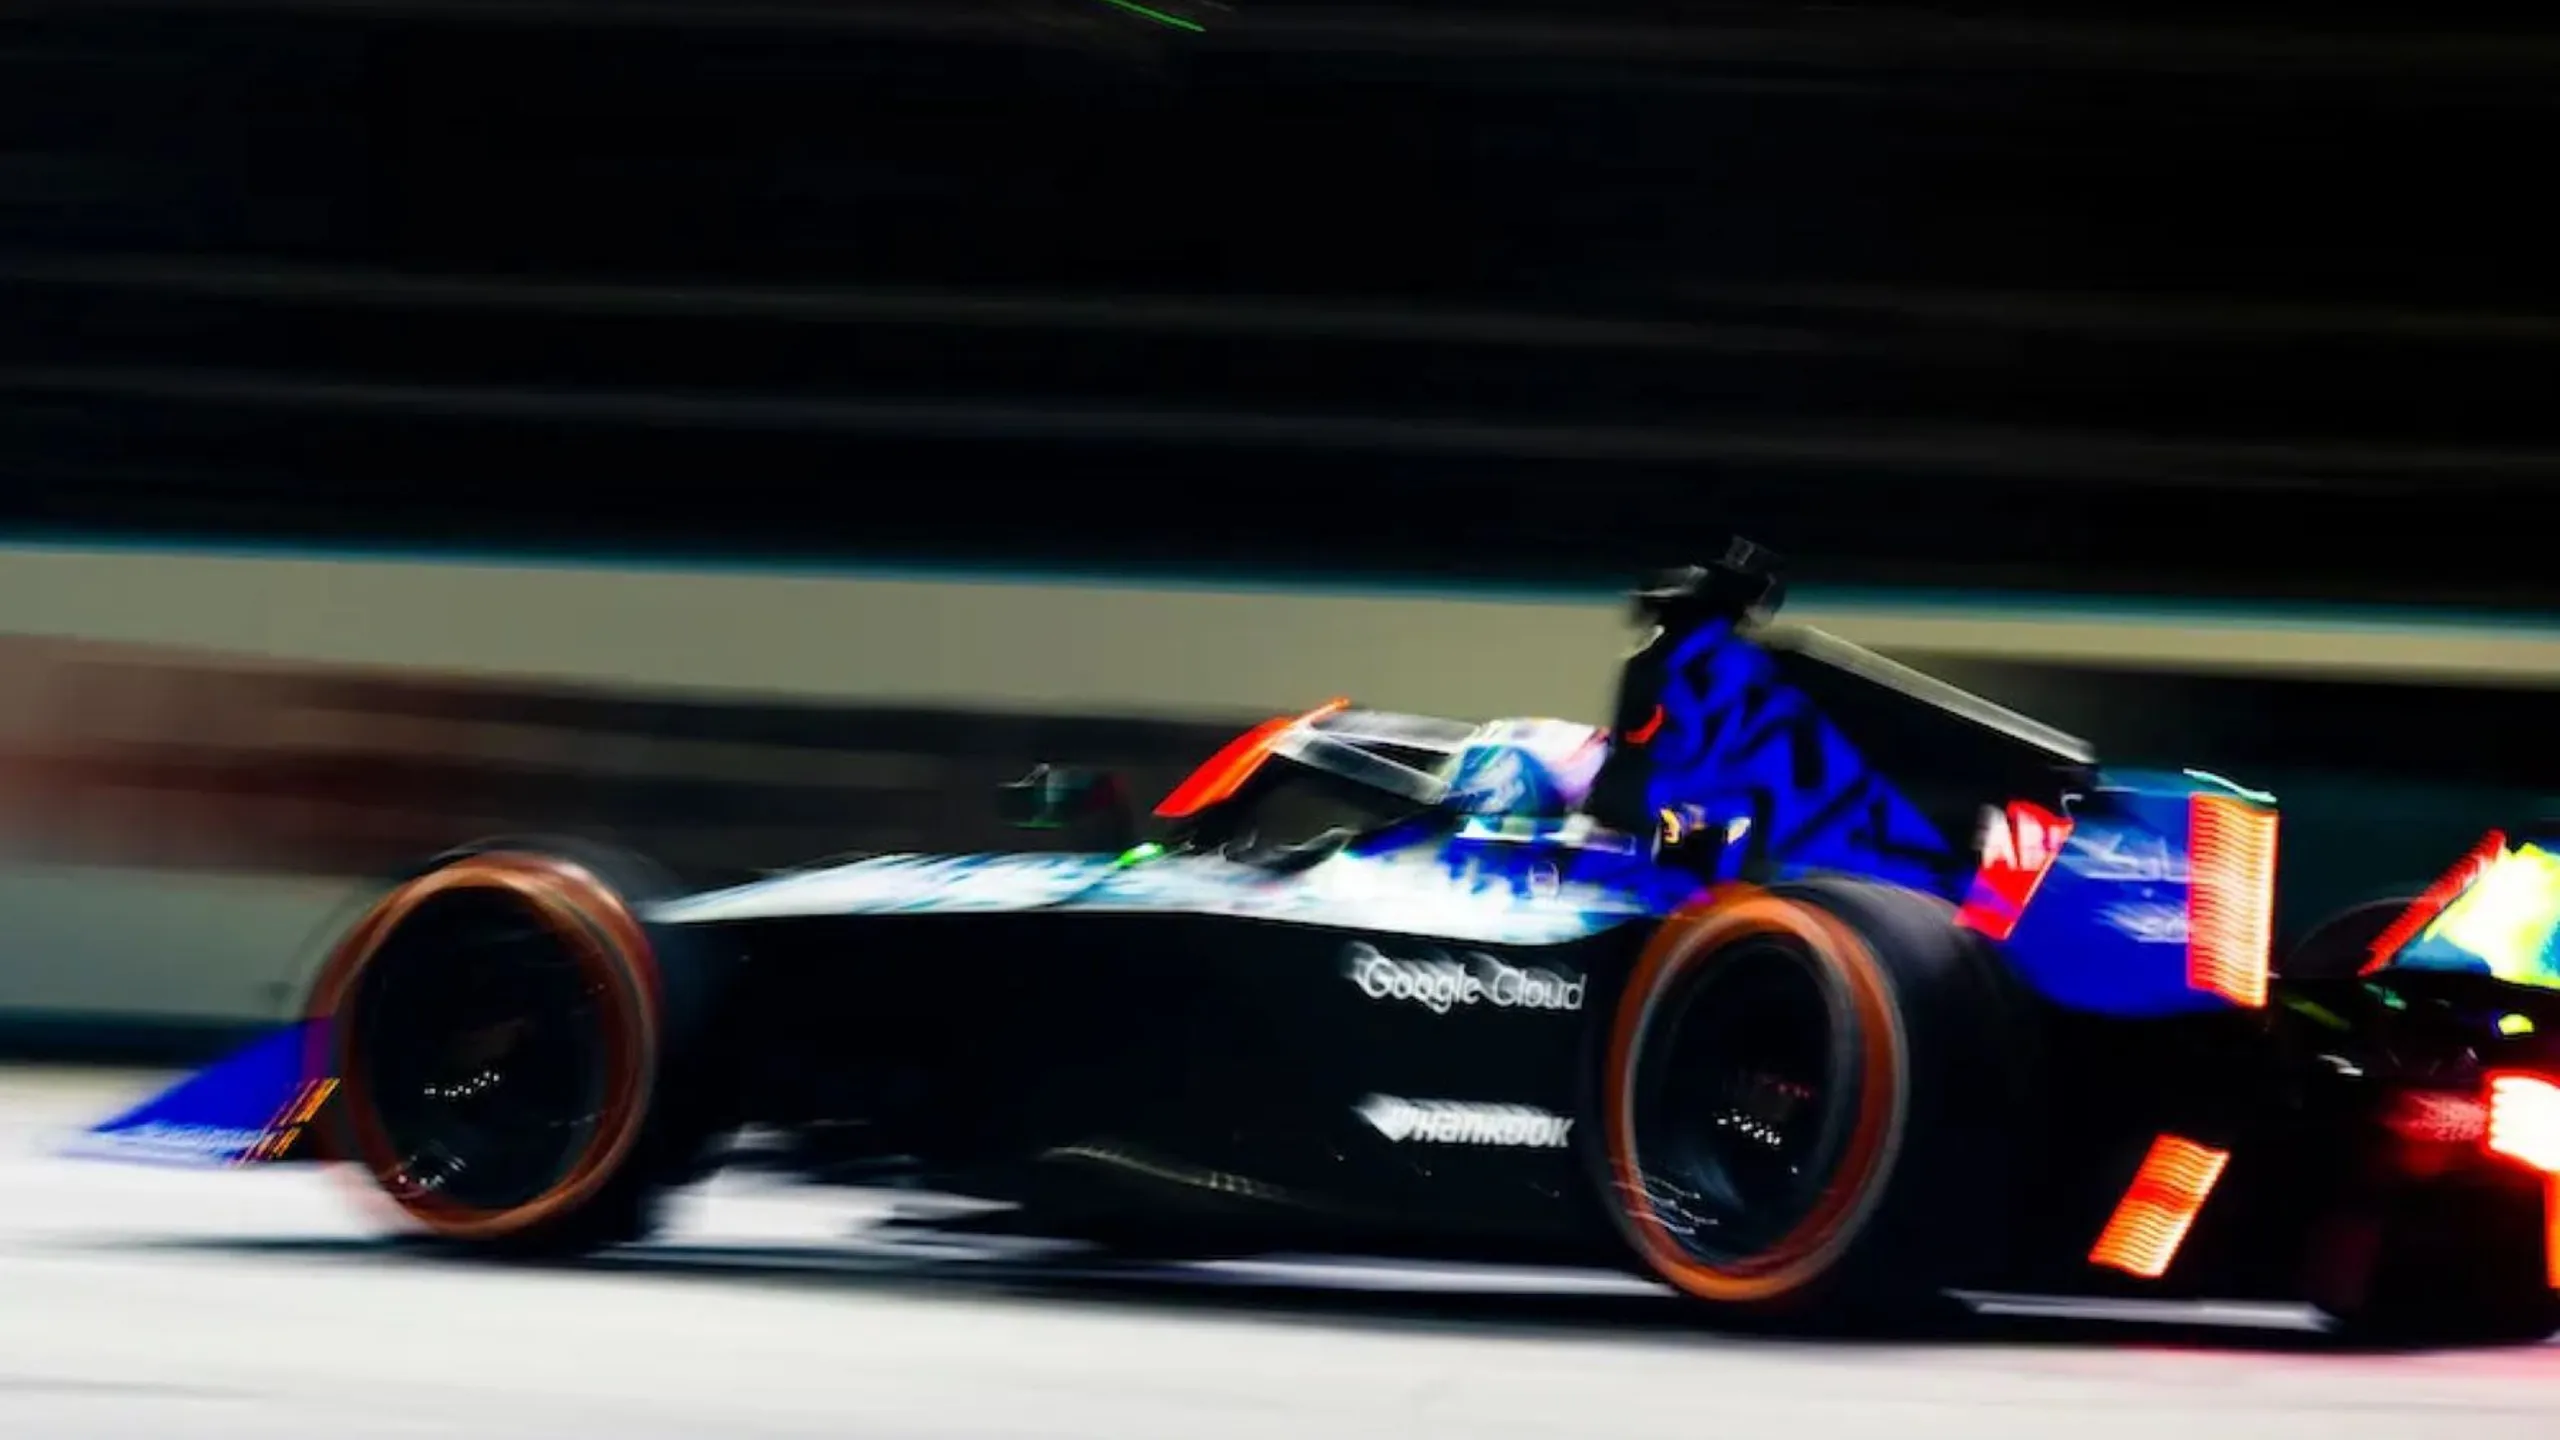 Google Cloud and Formula E collaborate in new technology partnership